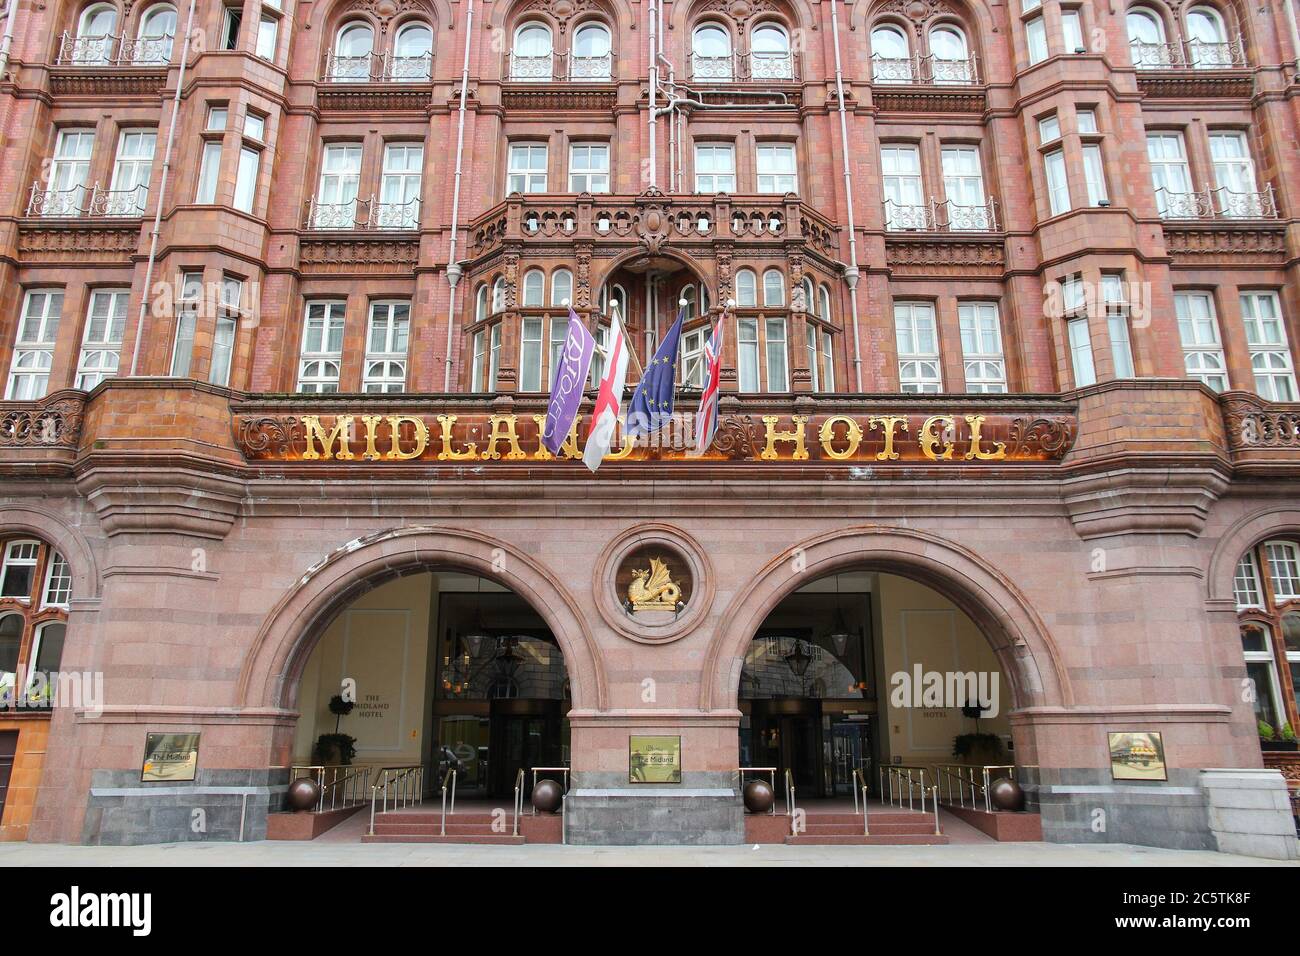 MANCHESTER, UK - APRIL 21, 2013: Historic Midland Hotel in Manchester, UK. The hotel was opened in 1903 and designed by Charles Trubshaw. Stock Photo